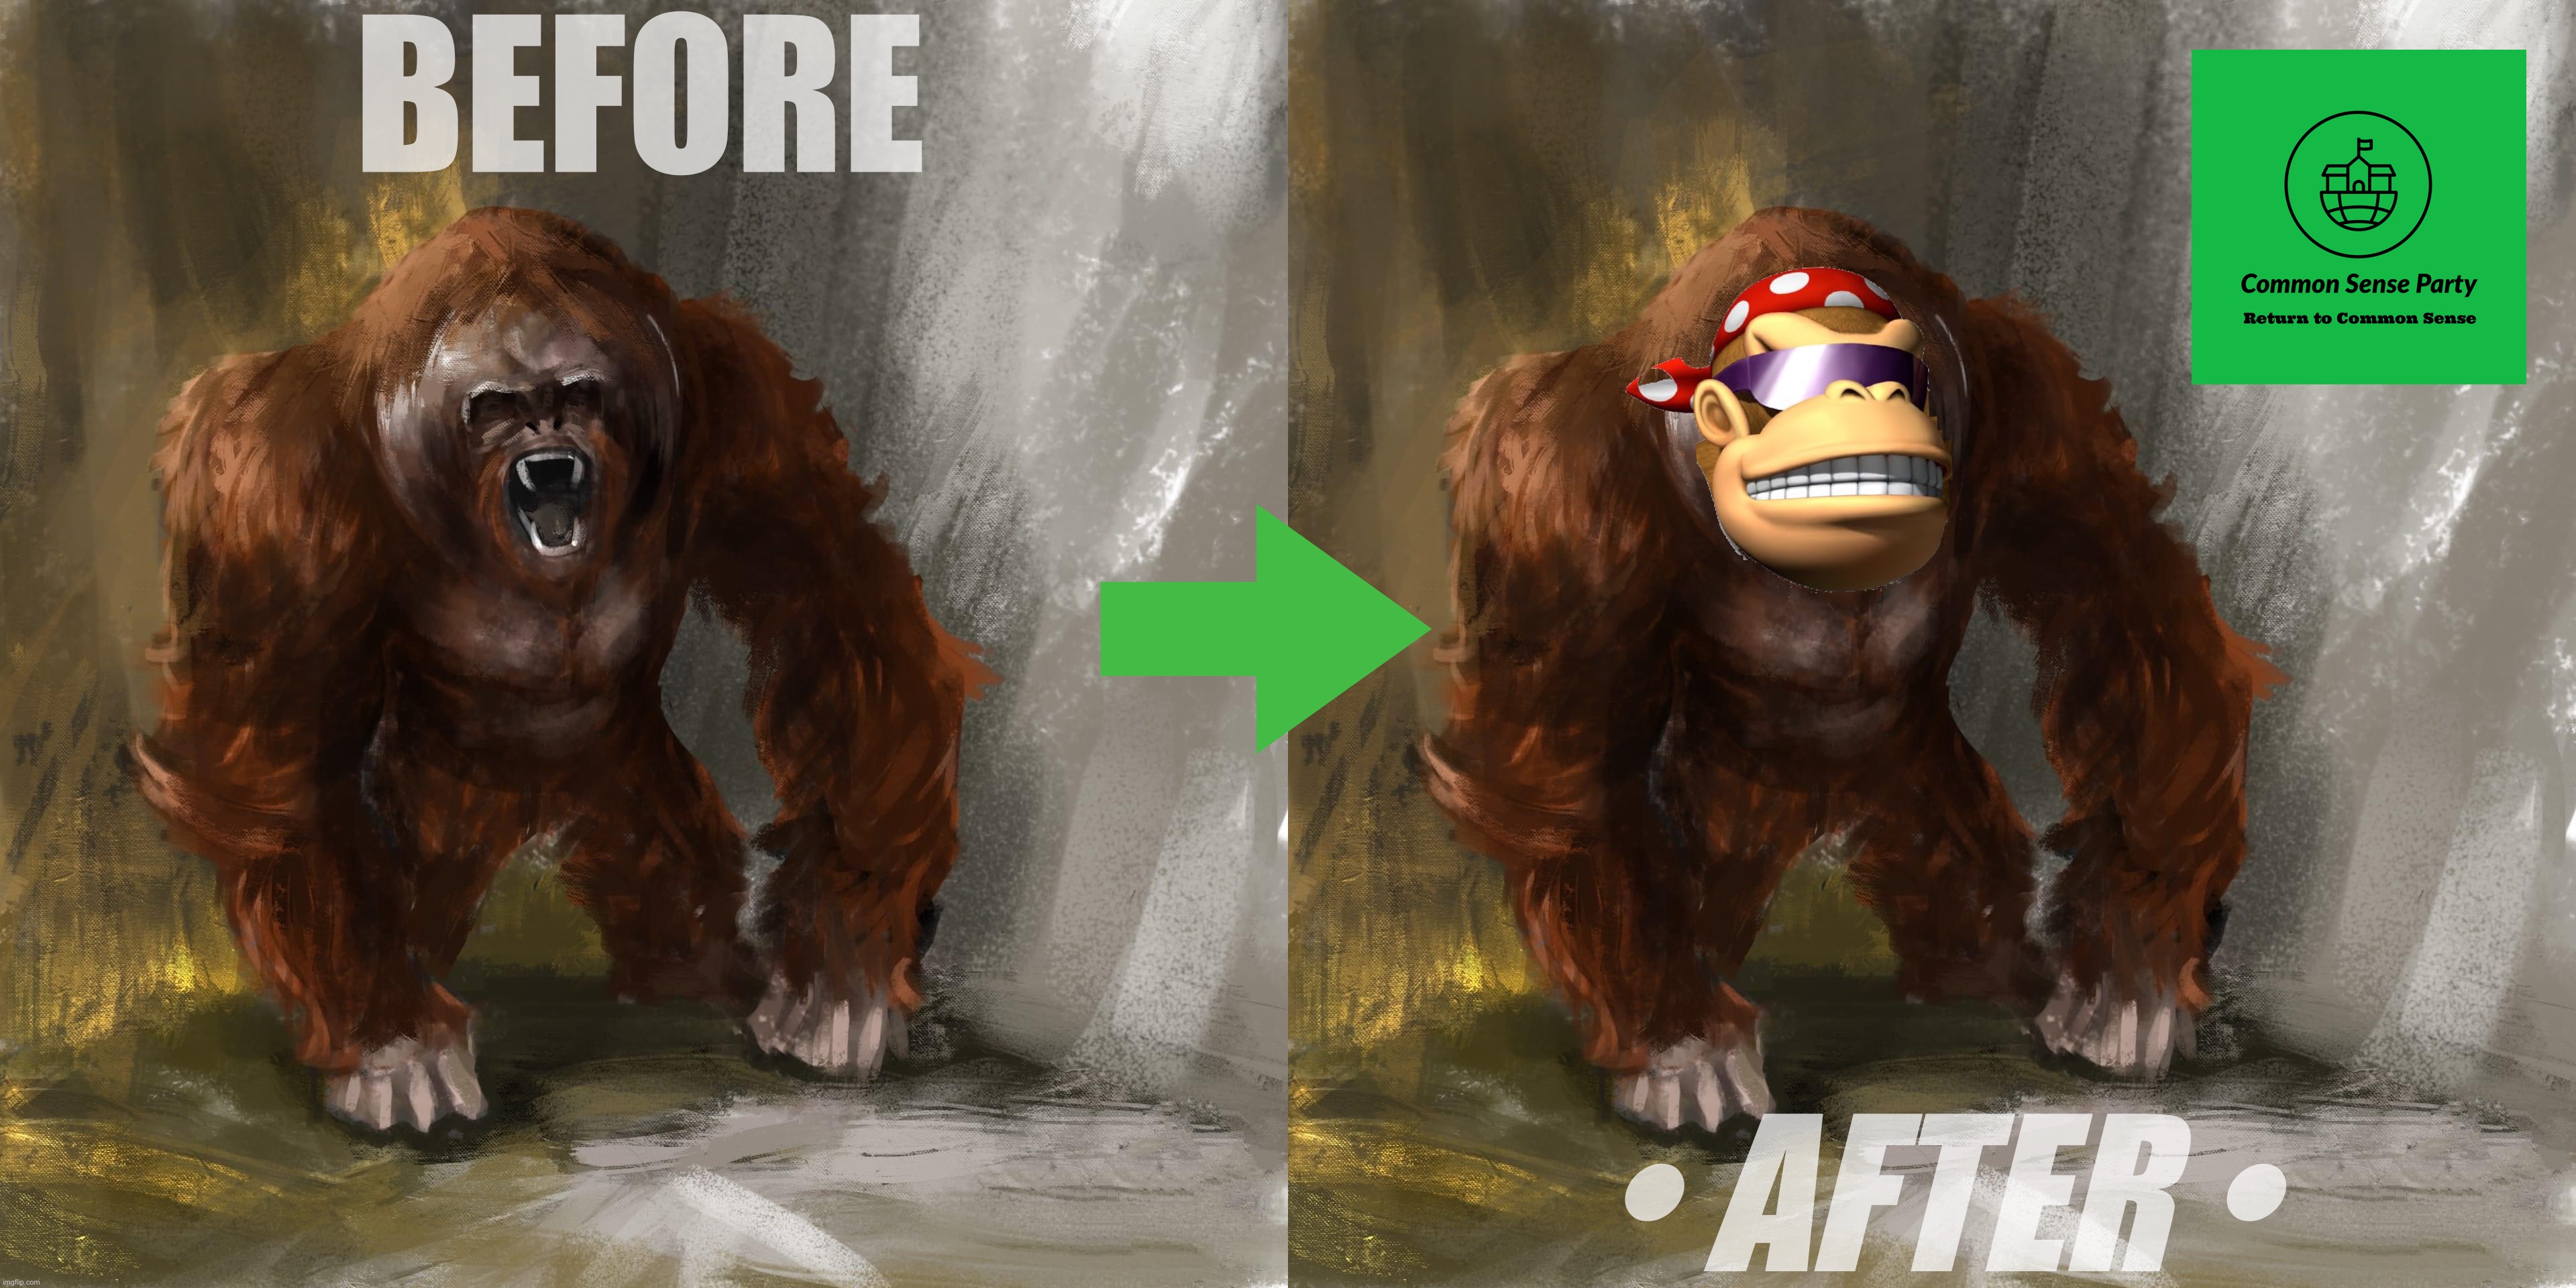 Field studies have shown that a massive dose of Common Sense may sedate your Gigantopithecus or other monkee. Order now! | BEFORE; • AFTER • | image tagged in gigantopithecus,common,sense,out,for,monkee | made w/ Imgflip meme maker